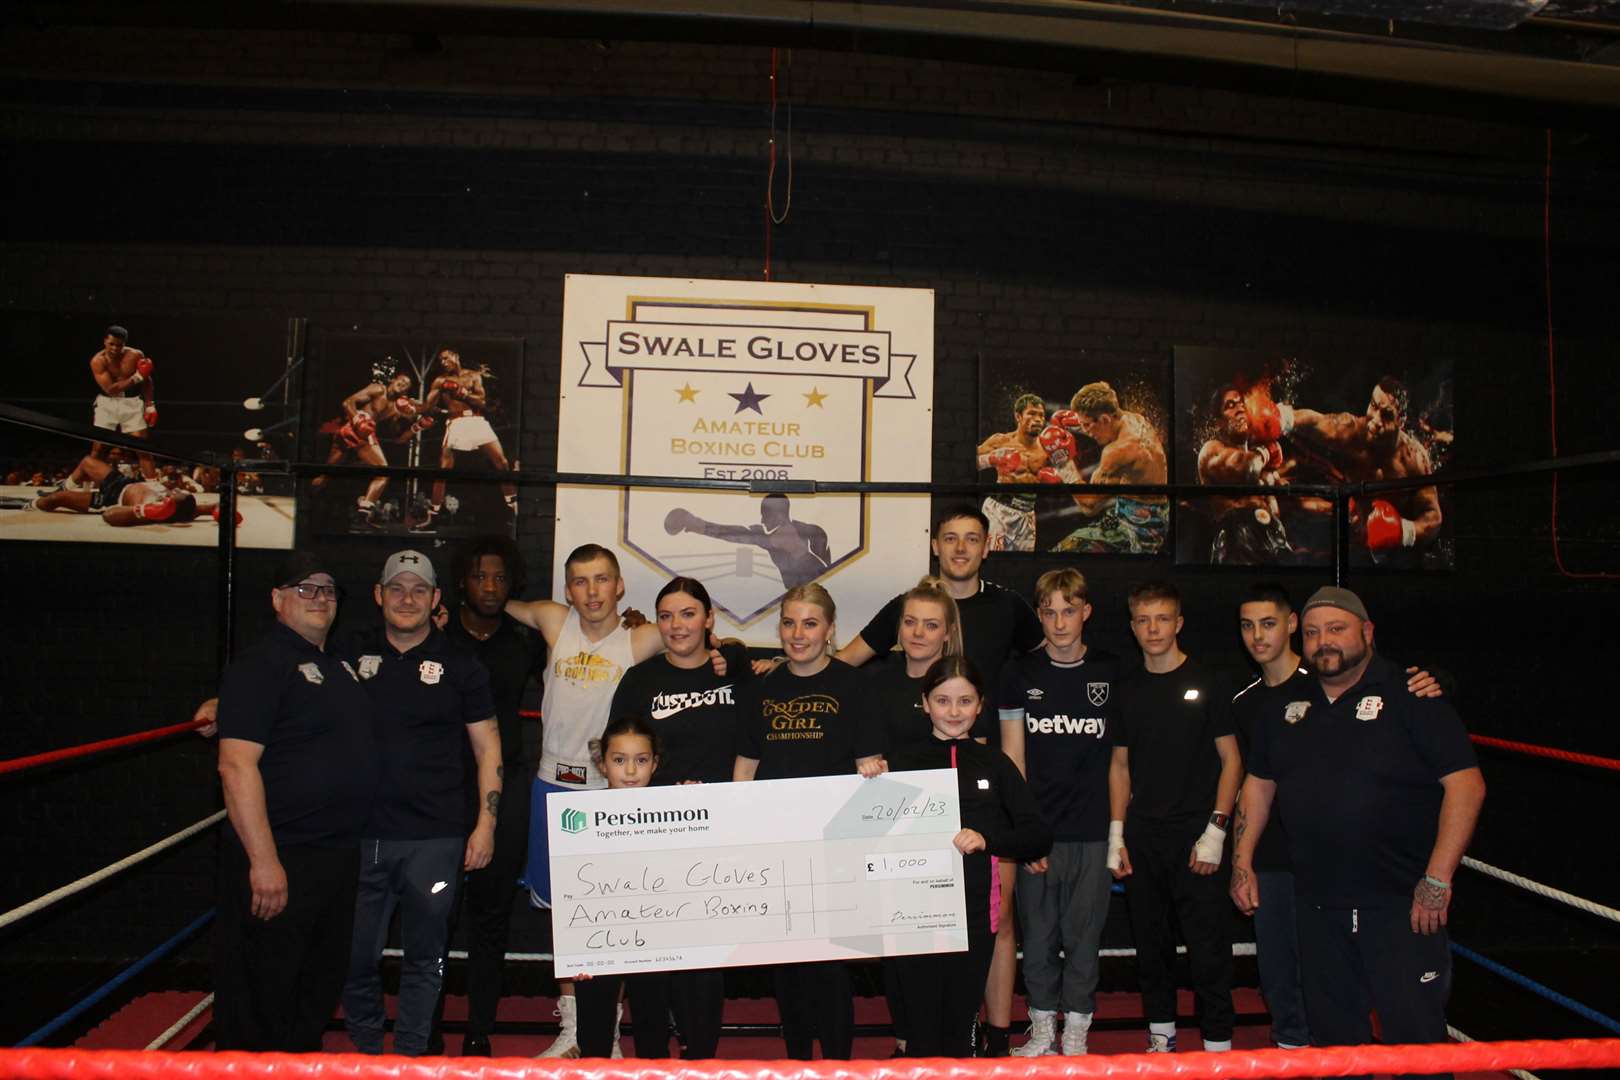 Swale Gloves Amateur Boxing Club, in Kemsley, received £1,000 from developer Persimmon Homes. Picture: Swale Gloves Amateur Boxing Club